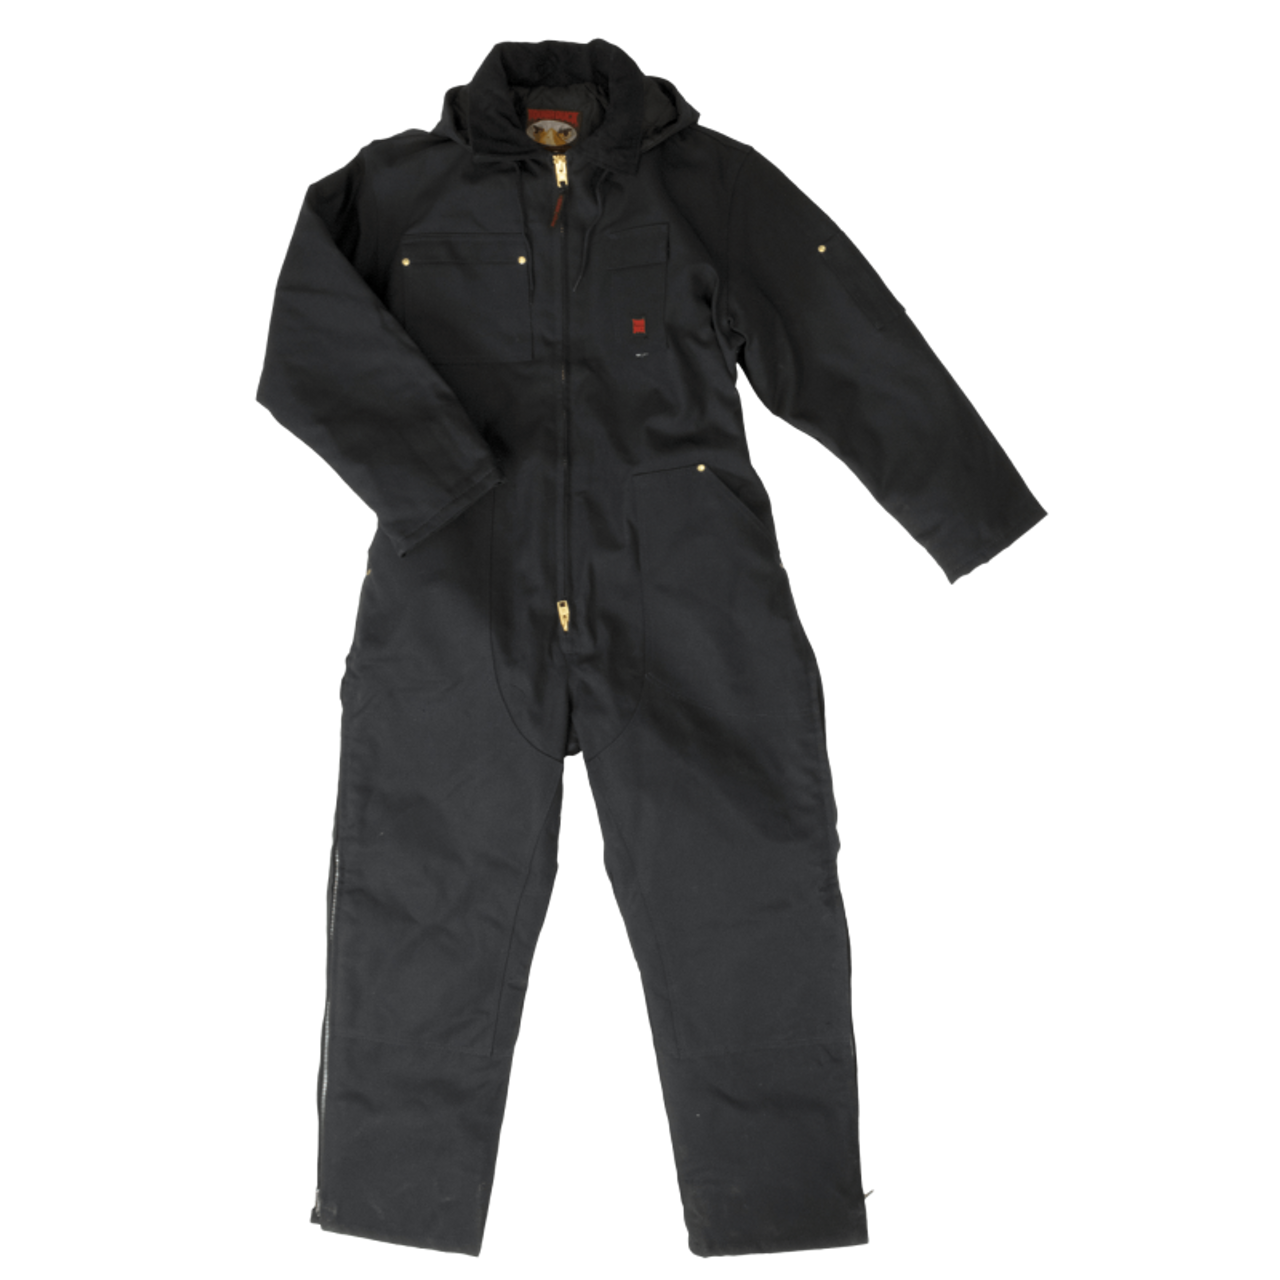 https://cdn11.bigcommerce.com/s-krsbcjf/images/stencil/1280x1280/products/5386/29574/Tough-Duck-Heavyweight-Lined-Coverall__S_1__33309.1641507692.png?c=2